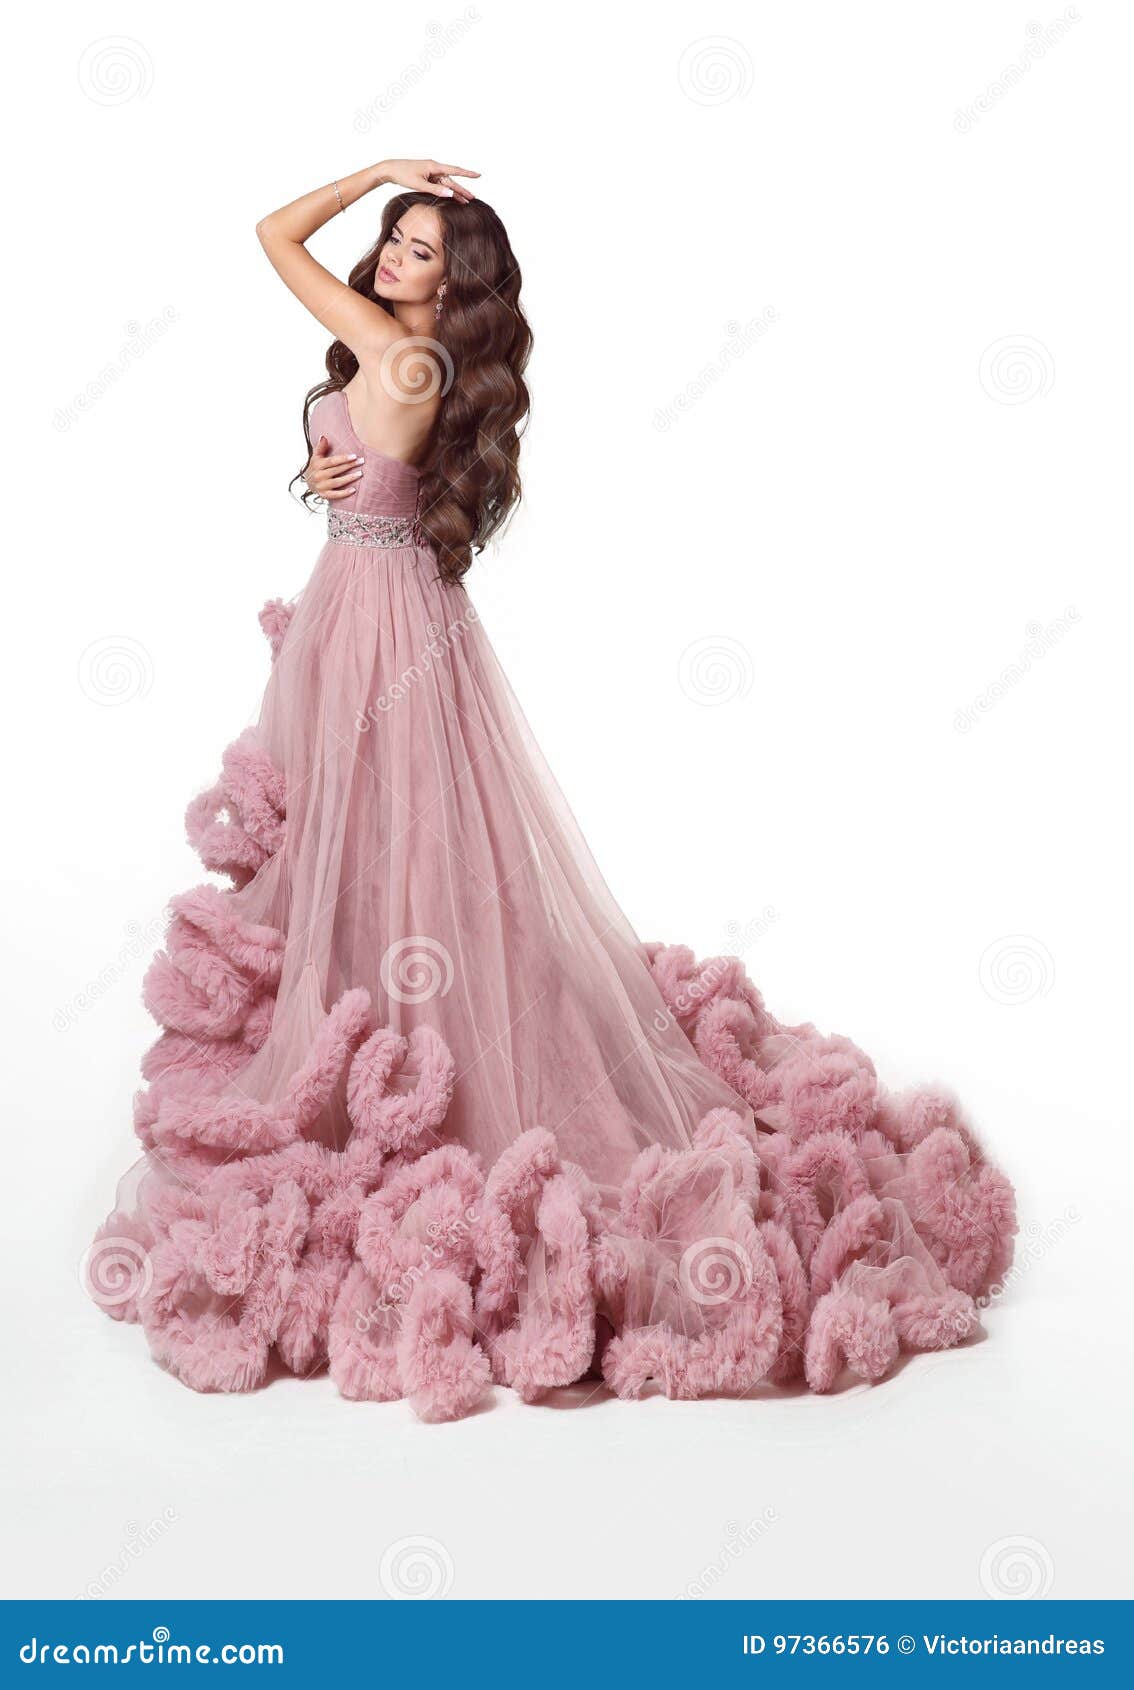 Young Fairy Pink Dress Hairstyle Curls Stock Photo 1262066320 | Shutterstock